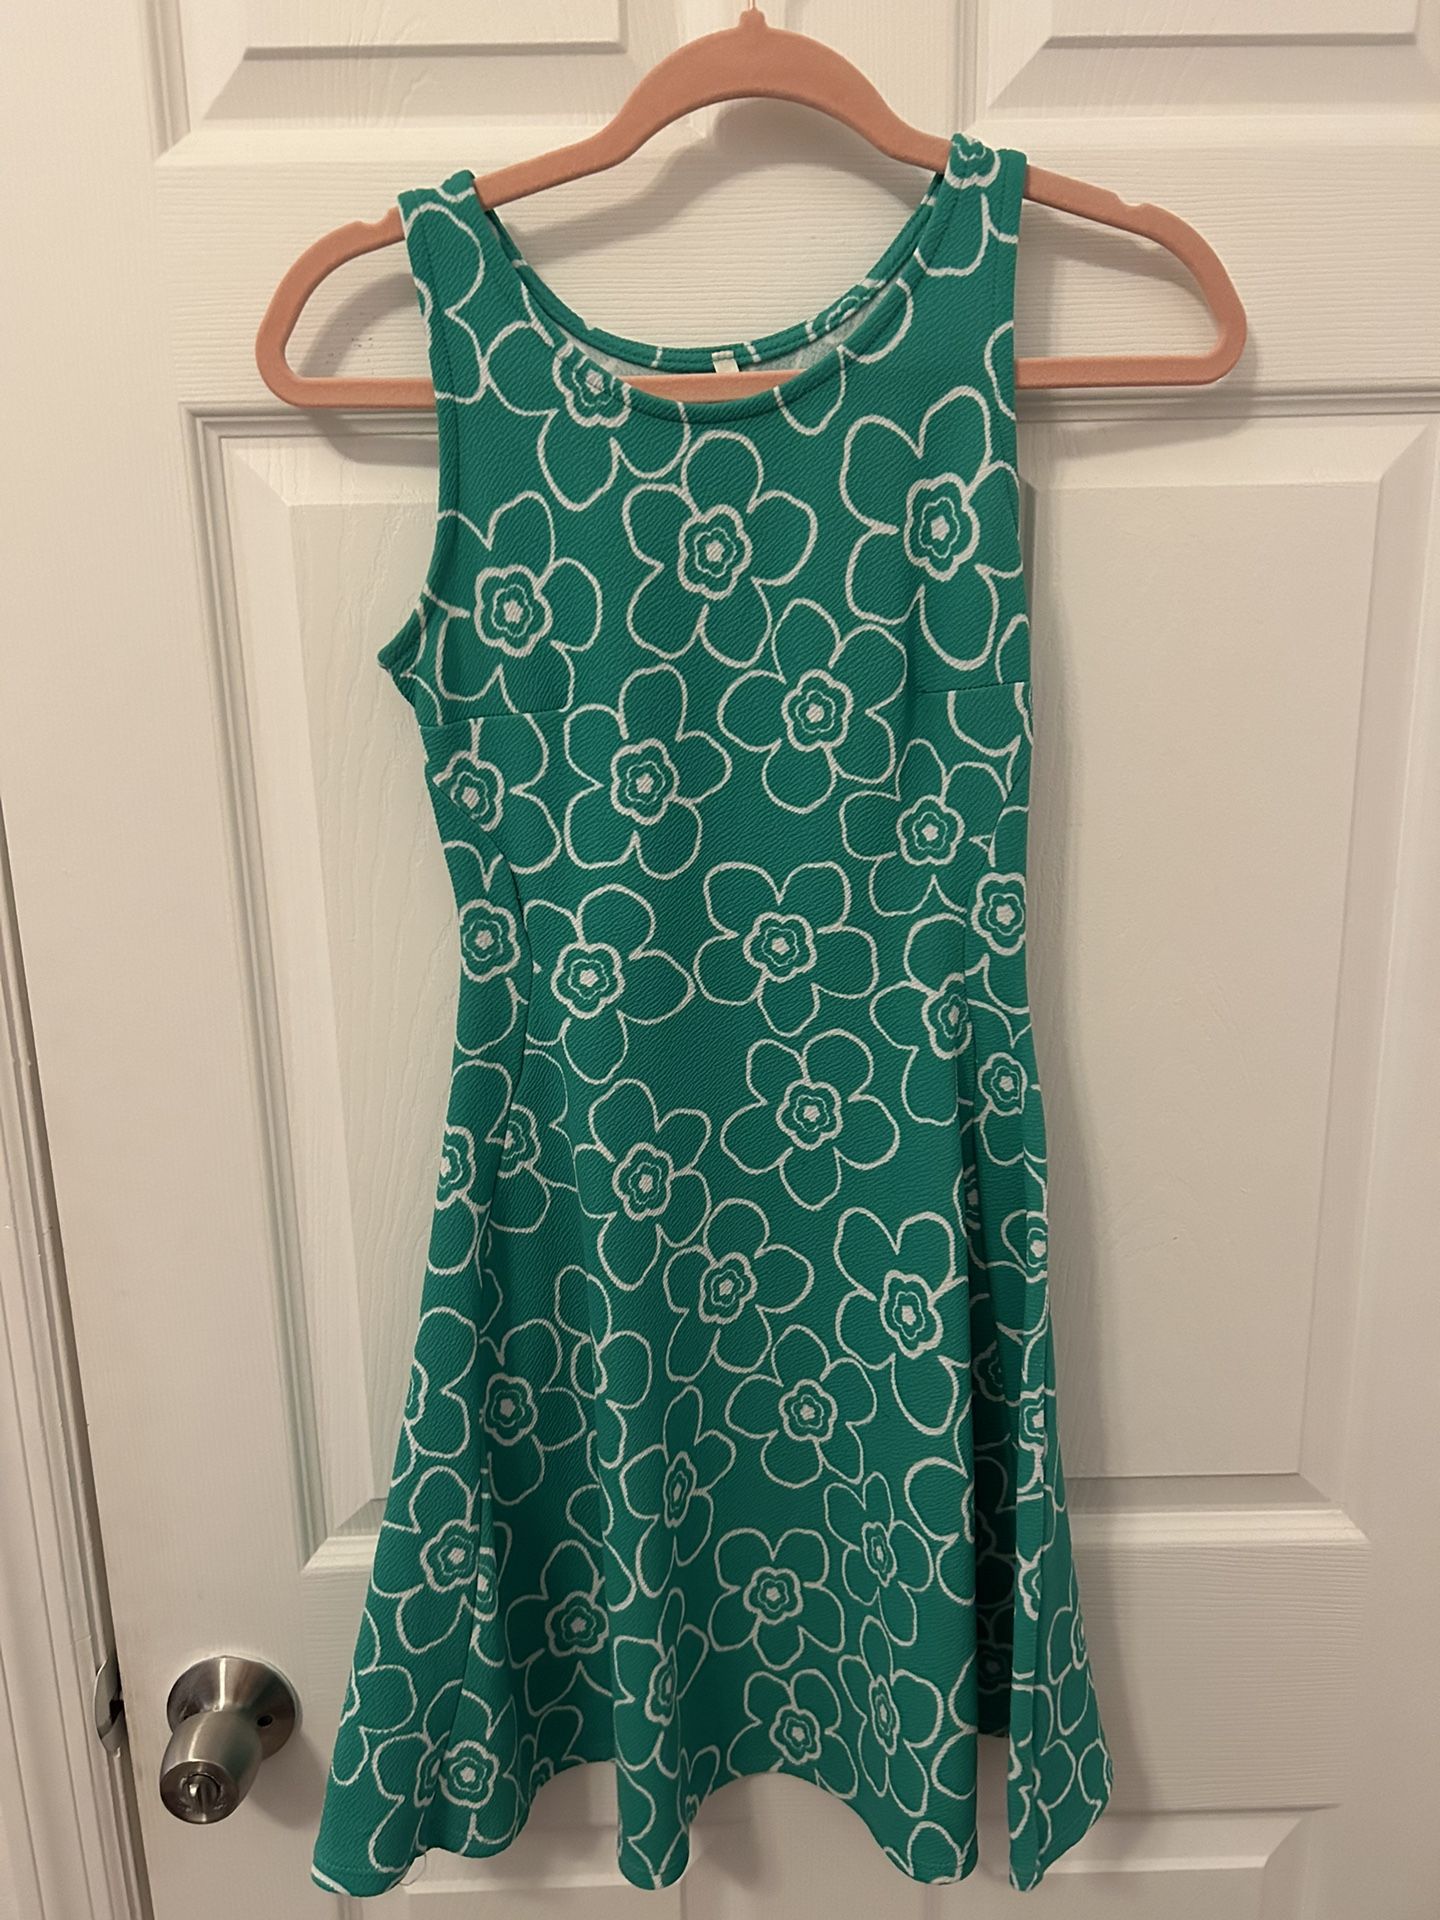 ALMOST NEW Cute Little Green Dress with White Flowers for Teenager or Adult - Size Small